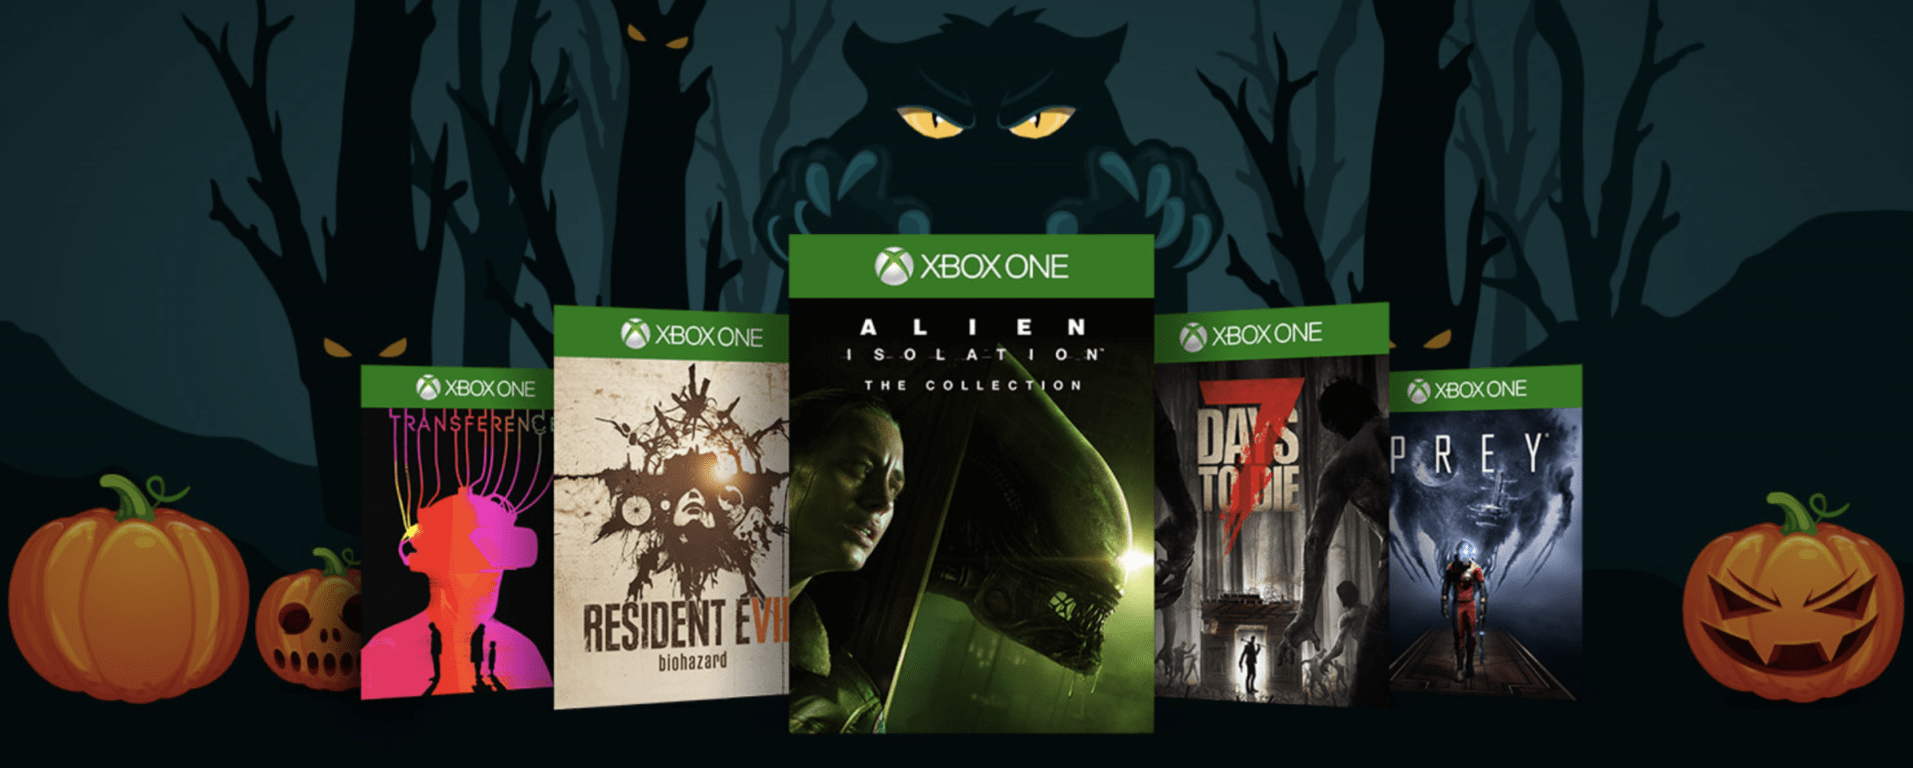 Save big on Xbox One horror games during this week's Shocktober Sale - OnMSFT.com - October 23, 2018